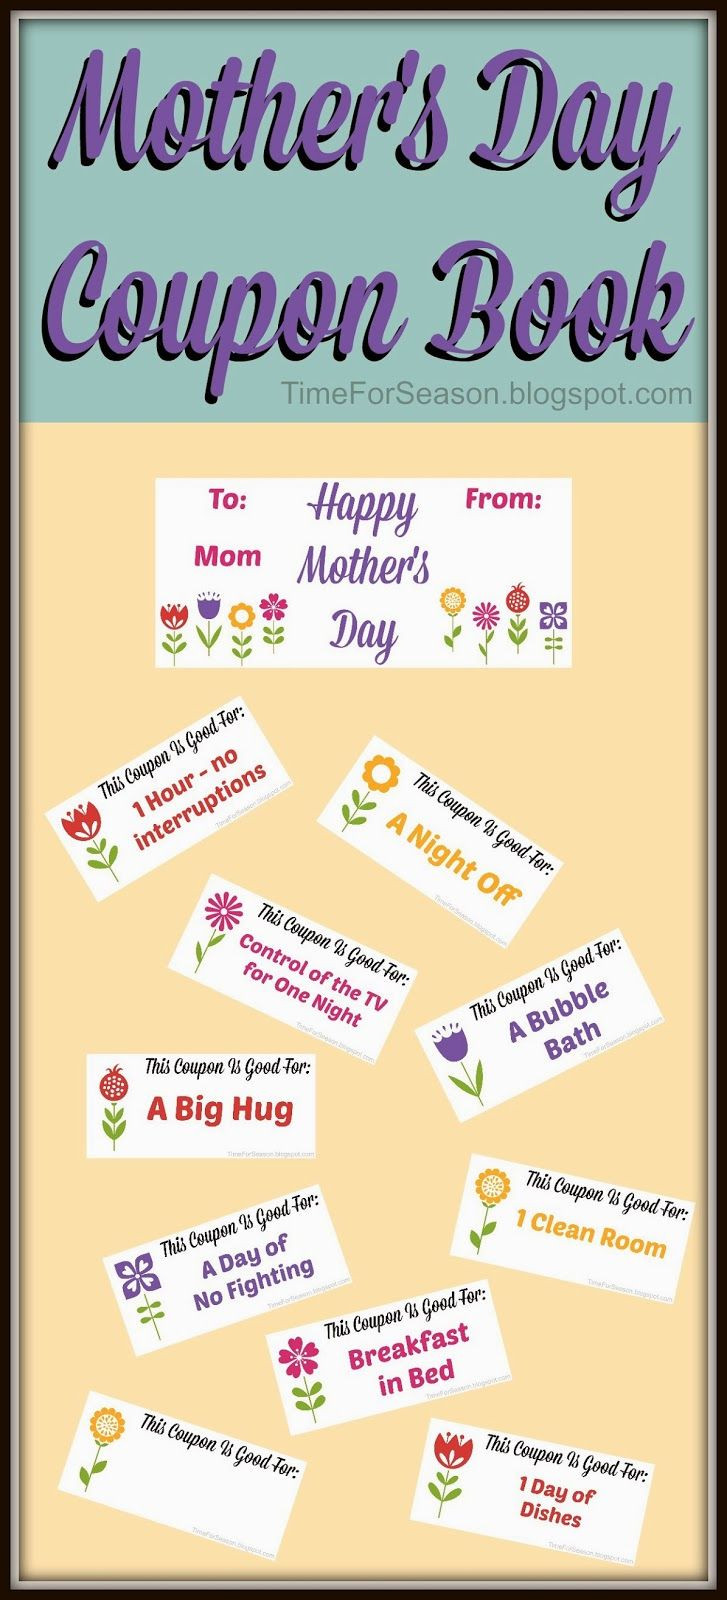 Mother's Day Coupon Book Ideas
 Free Mothers Day Coupon Book Printable mom t for mother